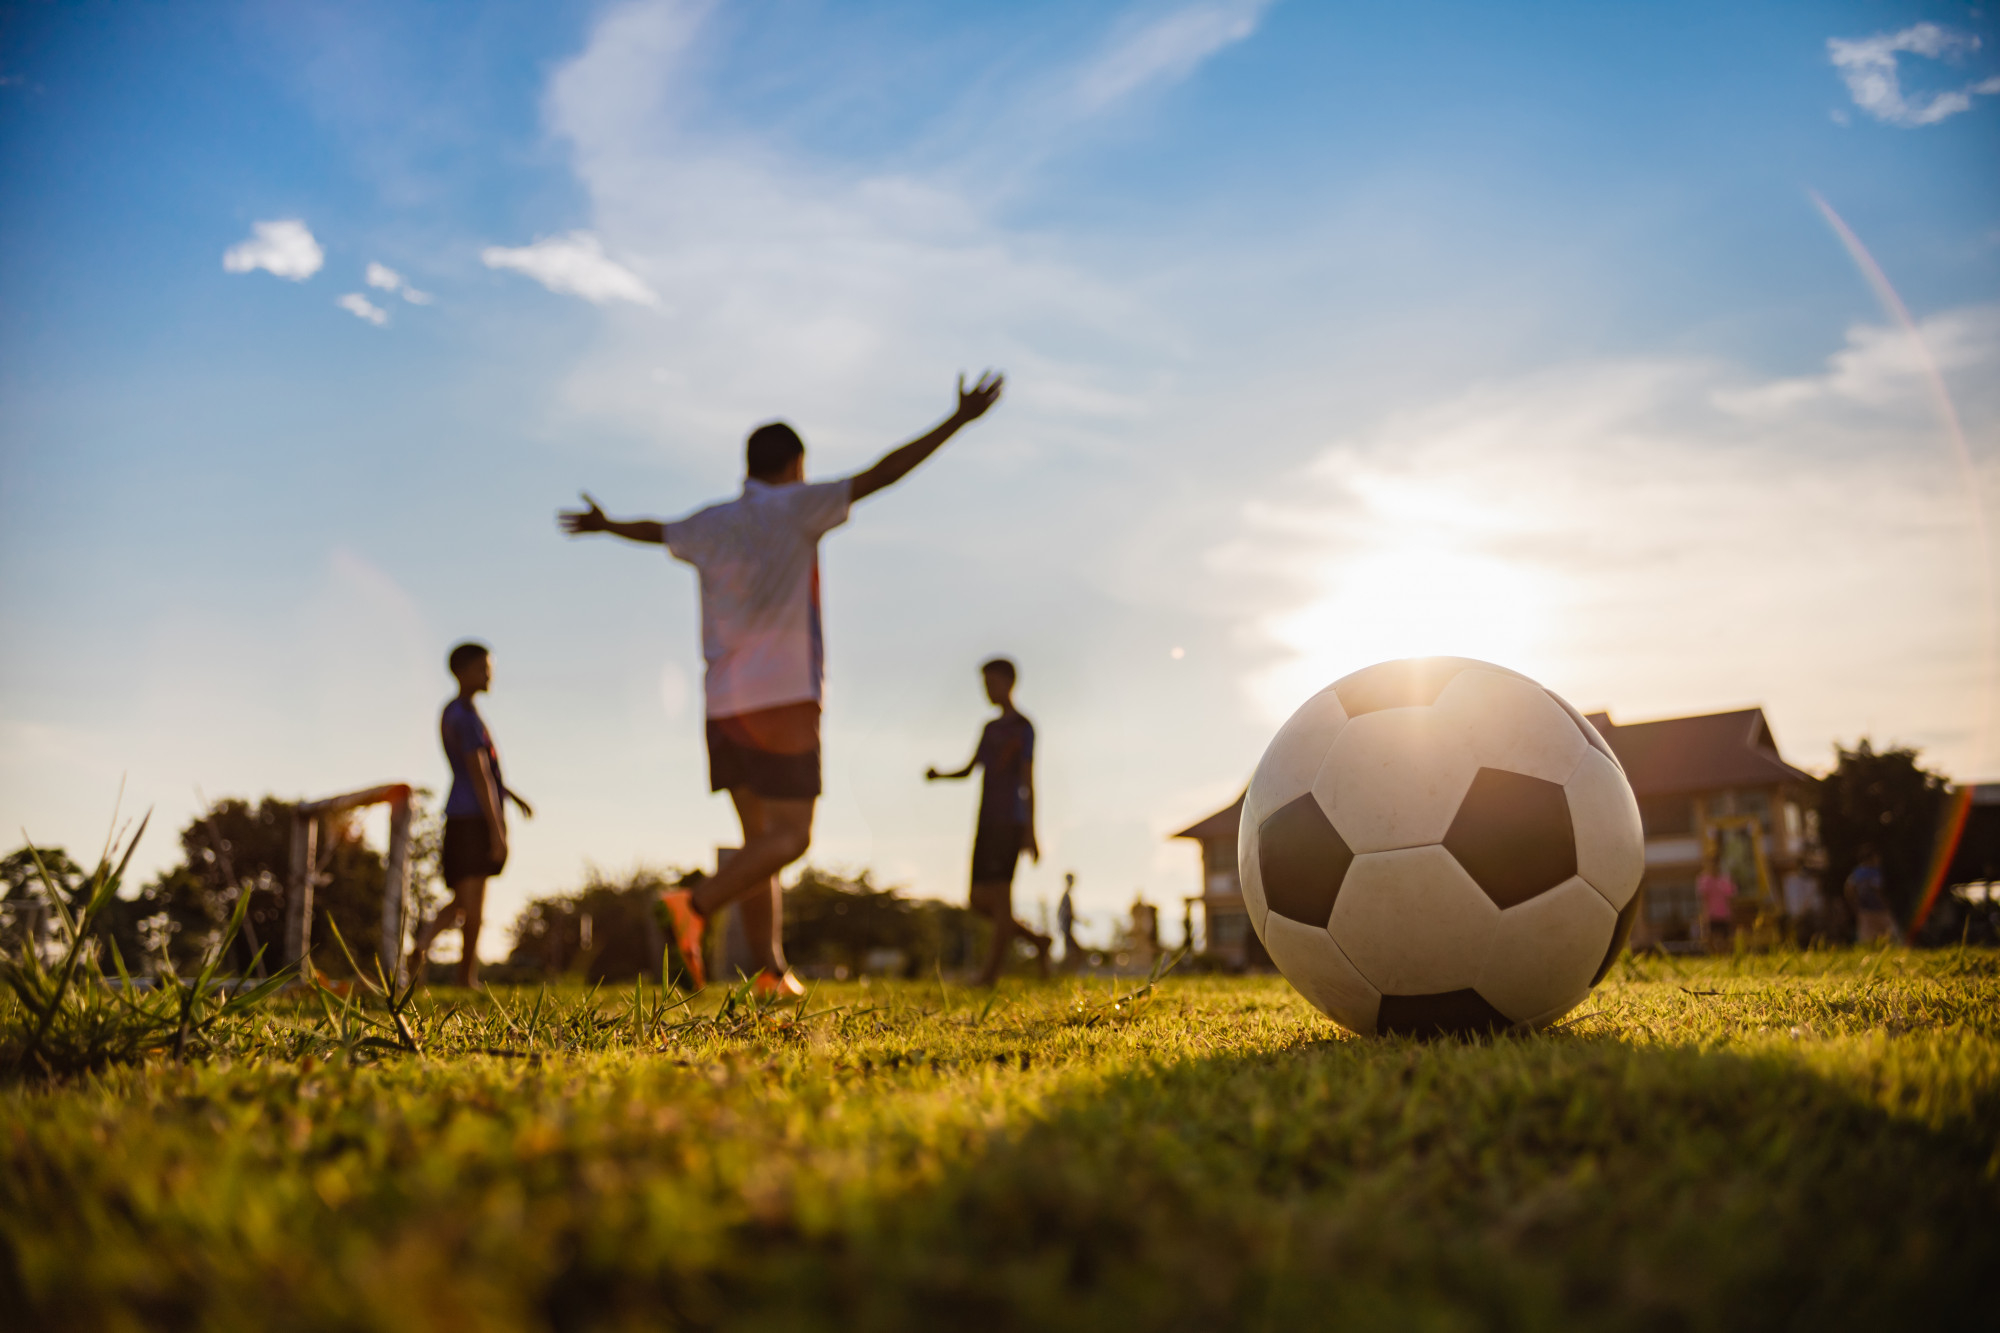 Boosting Confidence Through Soccer: How Soccer Training Helps Young Players